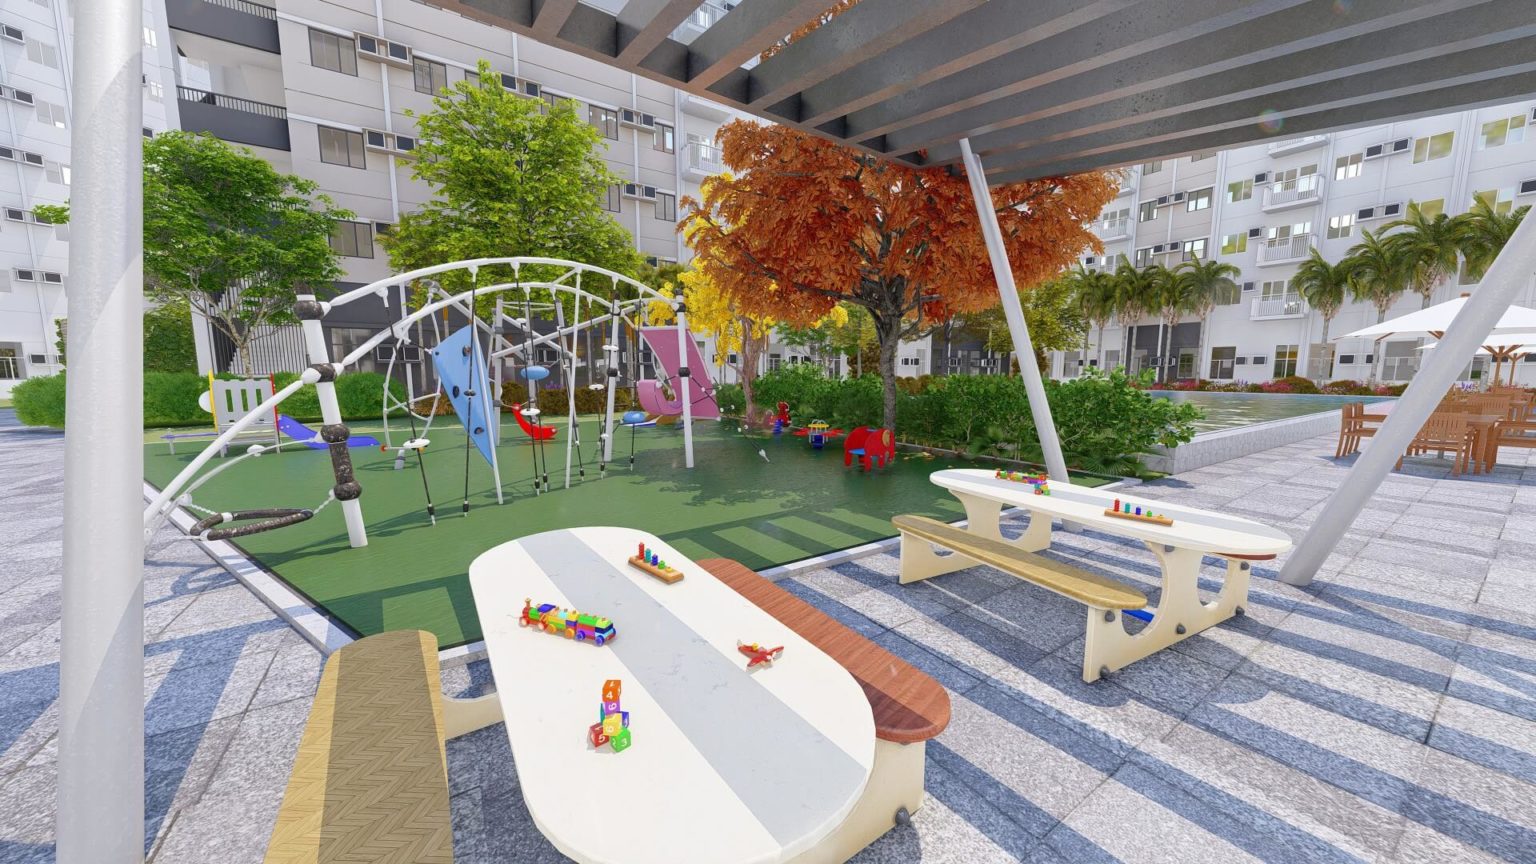 Charm Residences Childrens Play Area